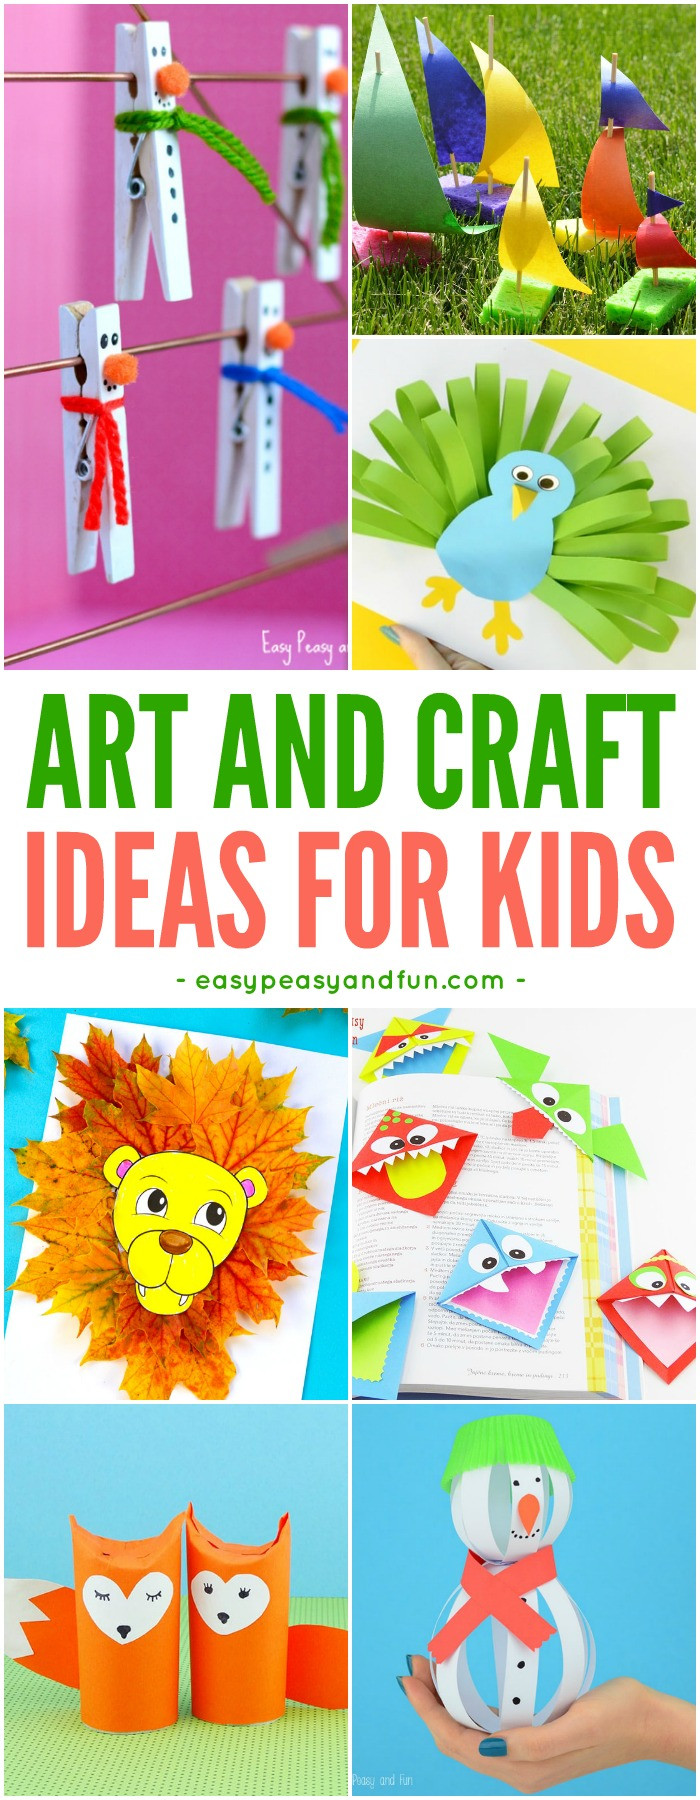 Toddler Art And Craft Ideas
 Crafts For Kids Tons of Art and Craft Ideas for Kids to